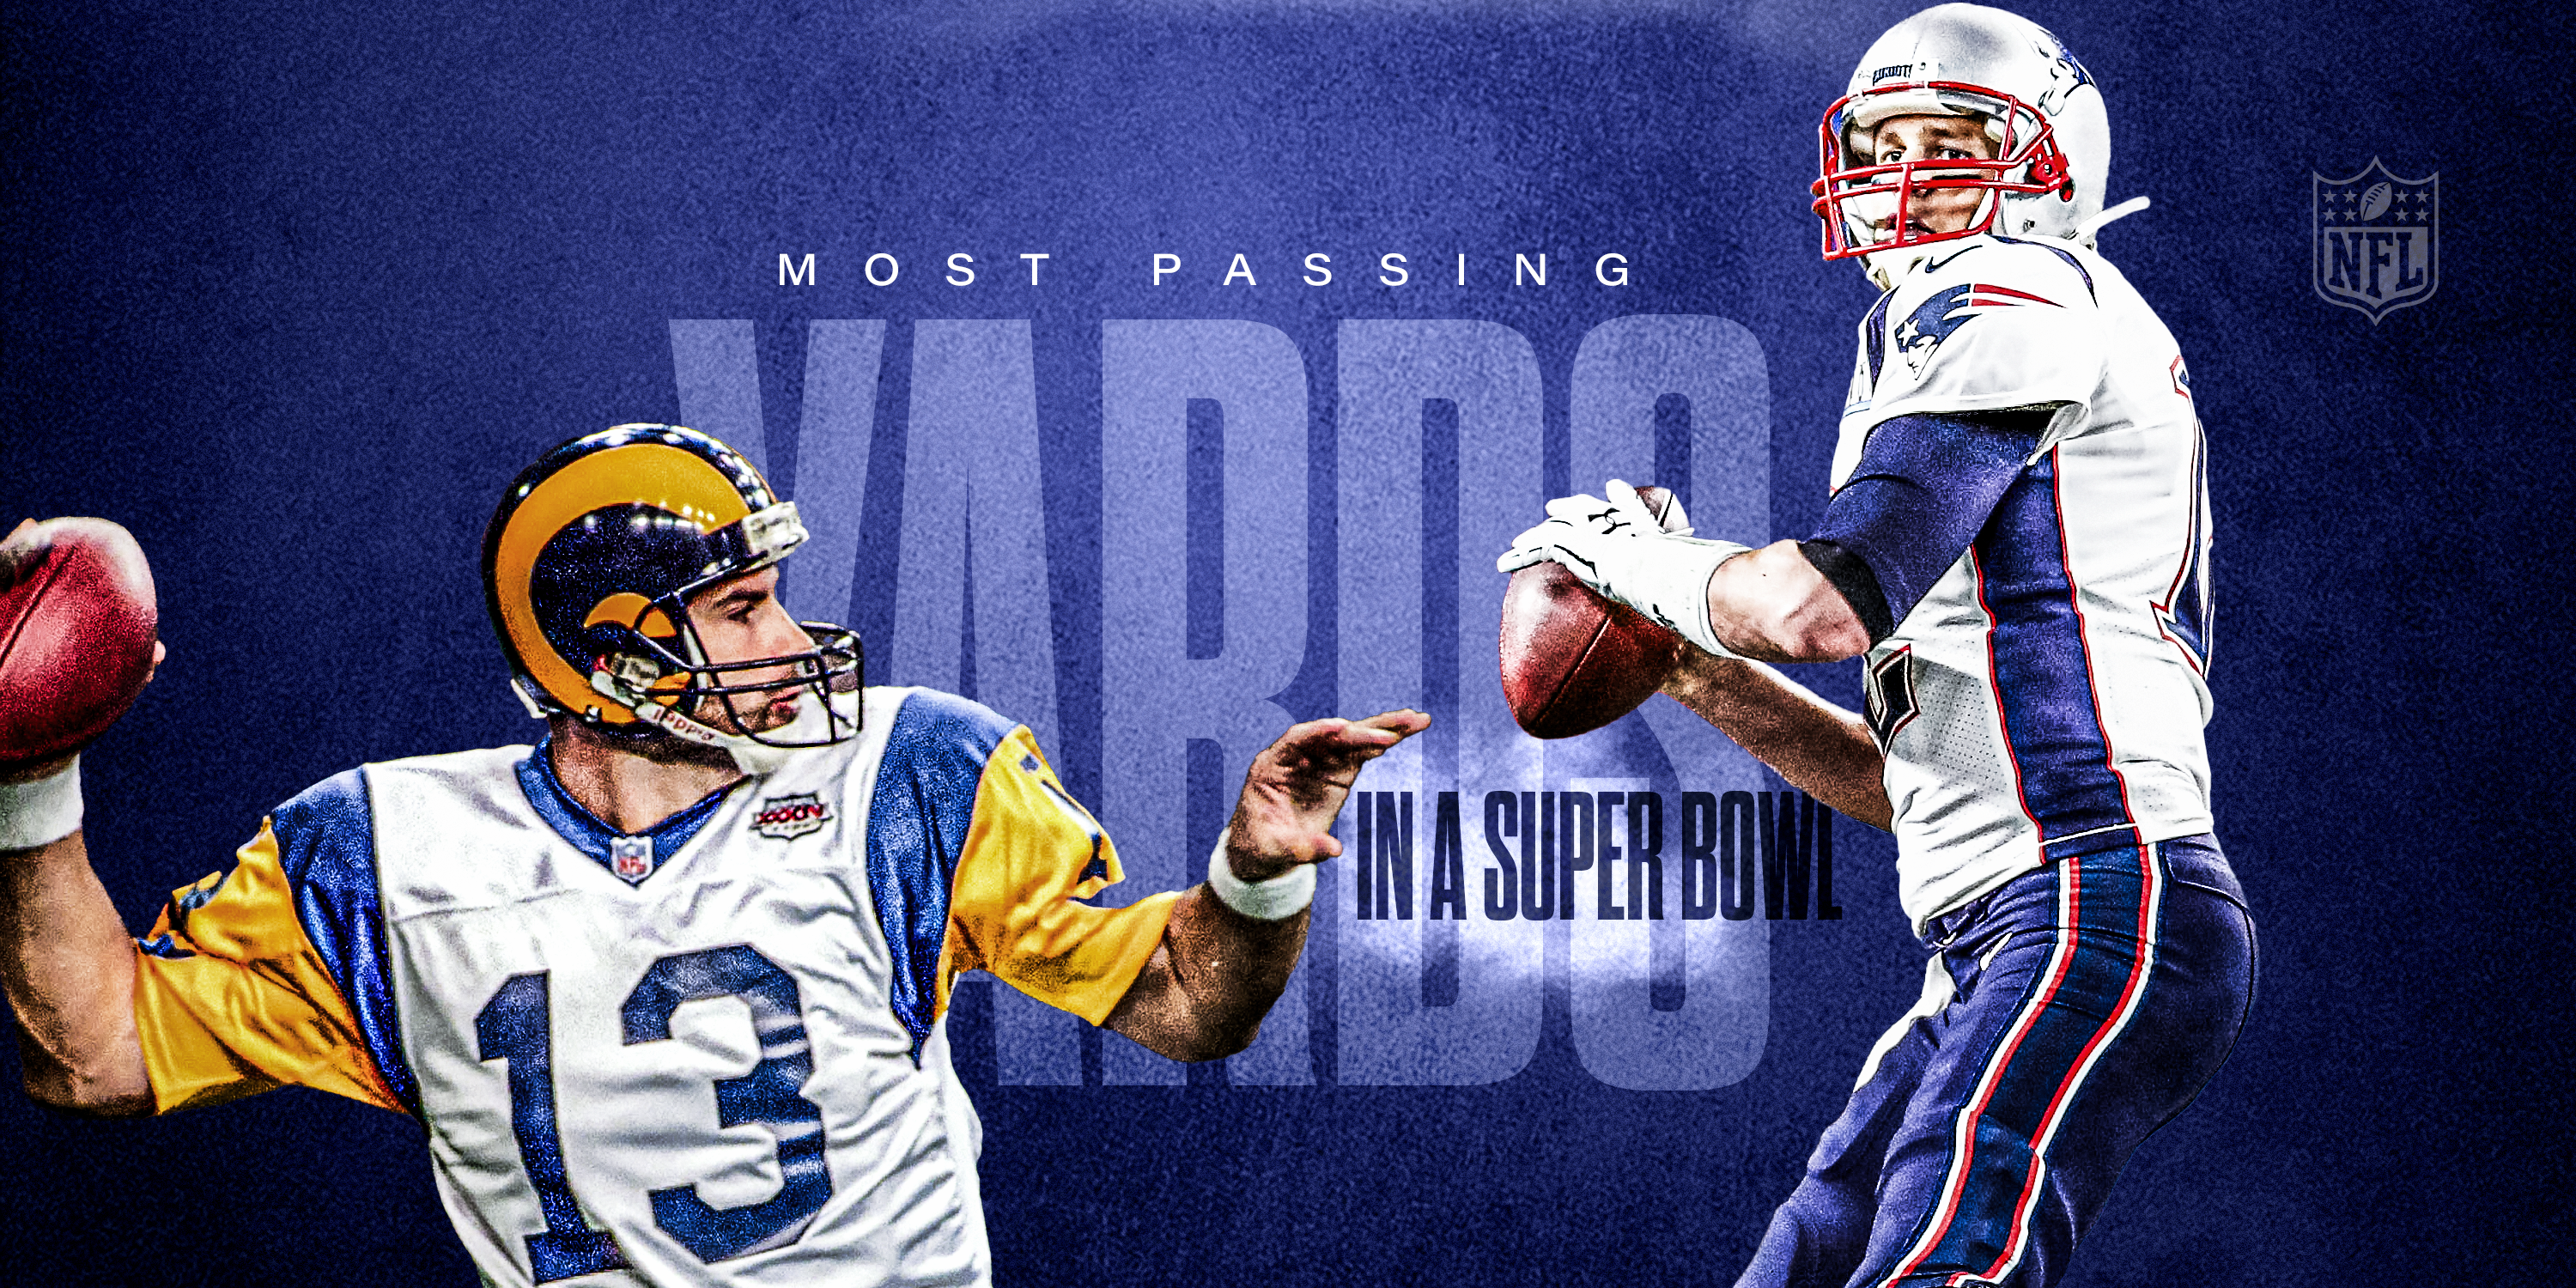 Most passing yards in a Super Bowl